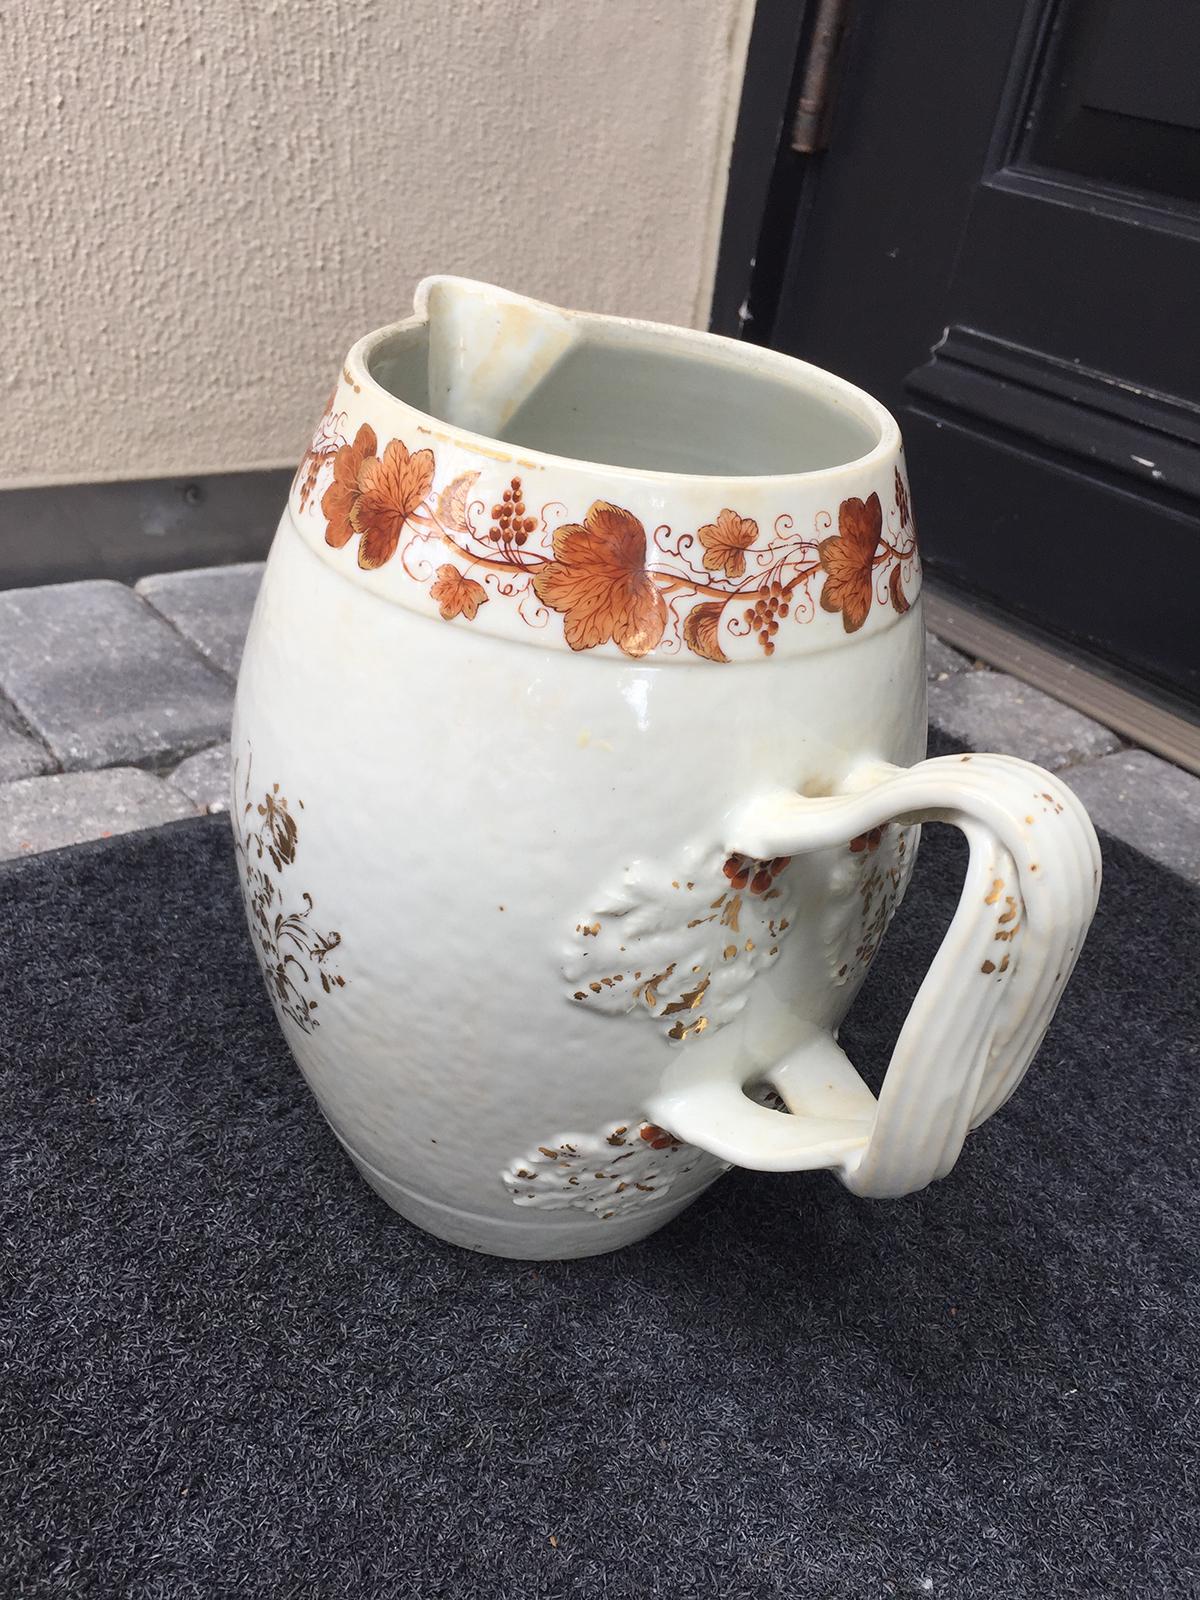 Early 19th Century circa 1800 Chinese Export Porcelain Pitcher For Sale 1